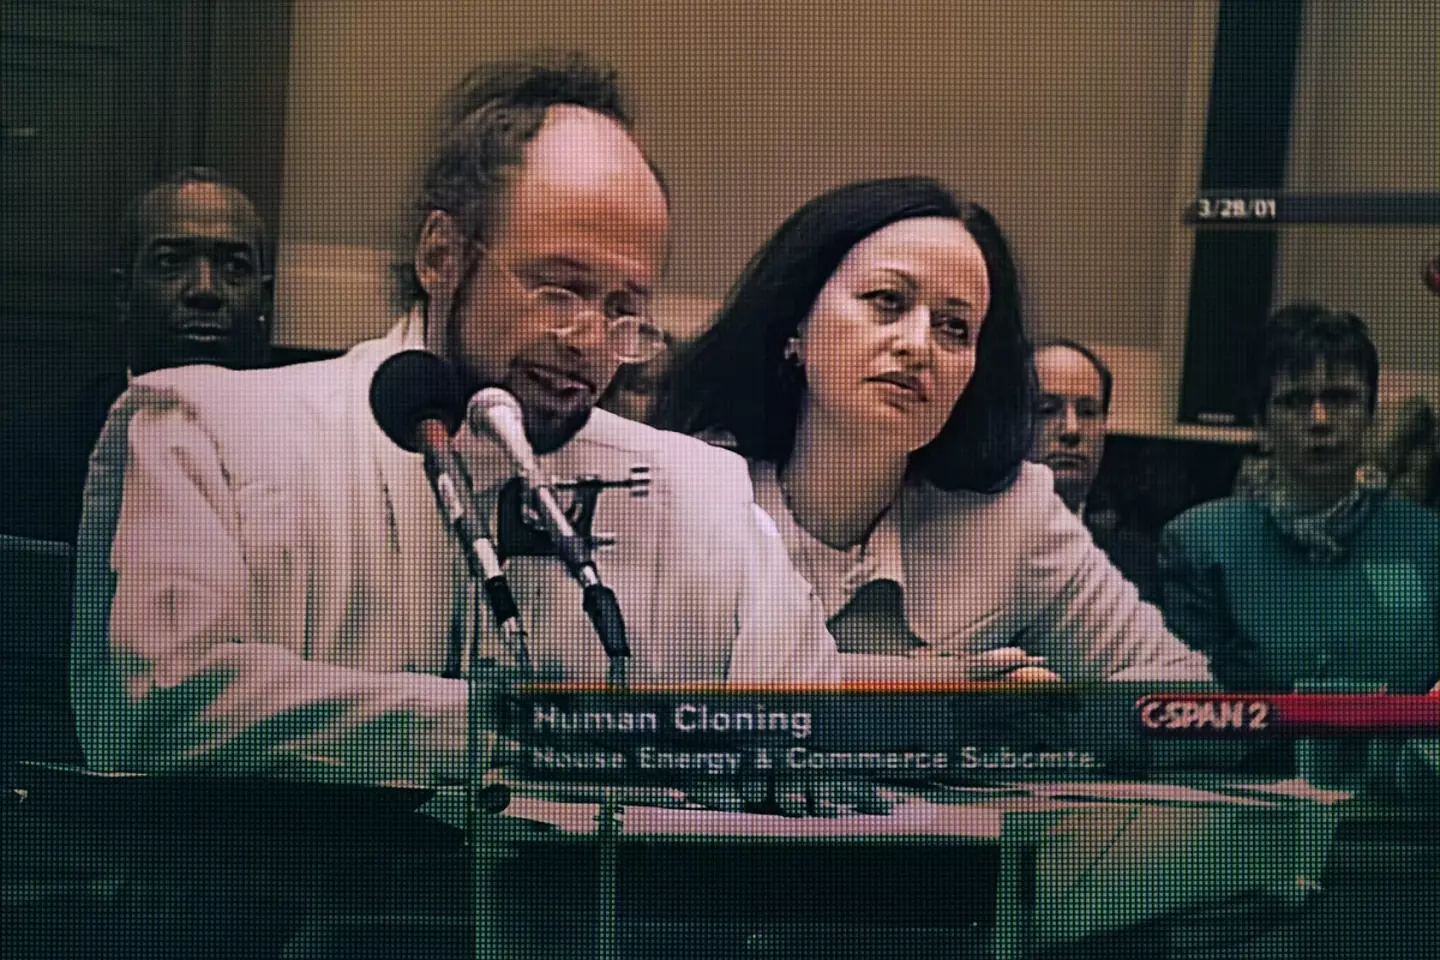 The 'prophet' and the cult rallied for human cloning in the early 2000s.